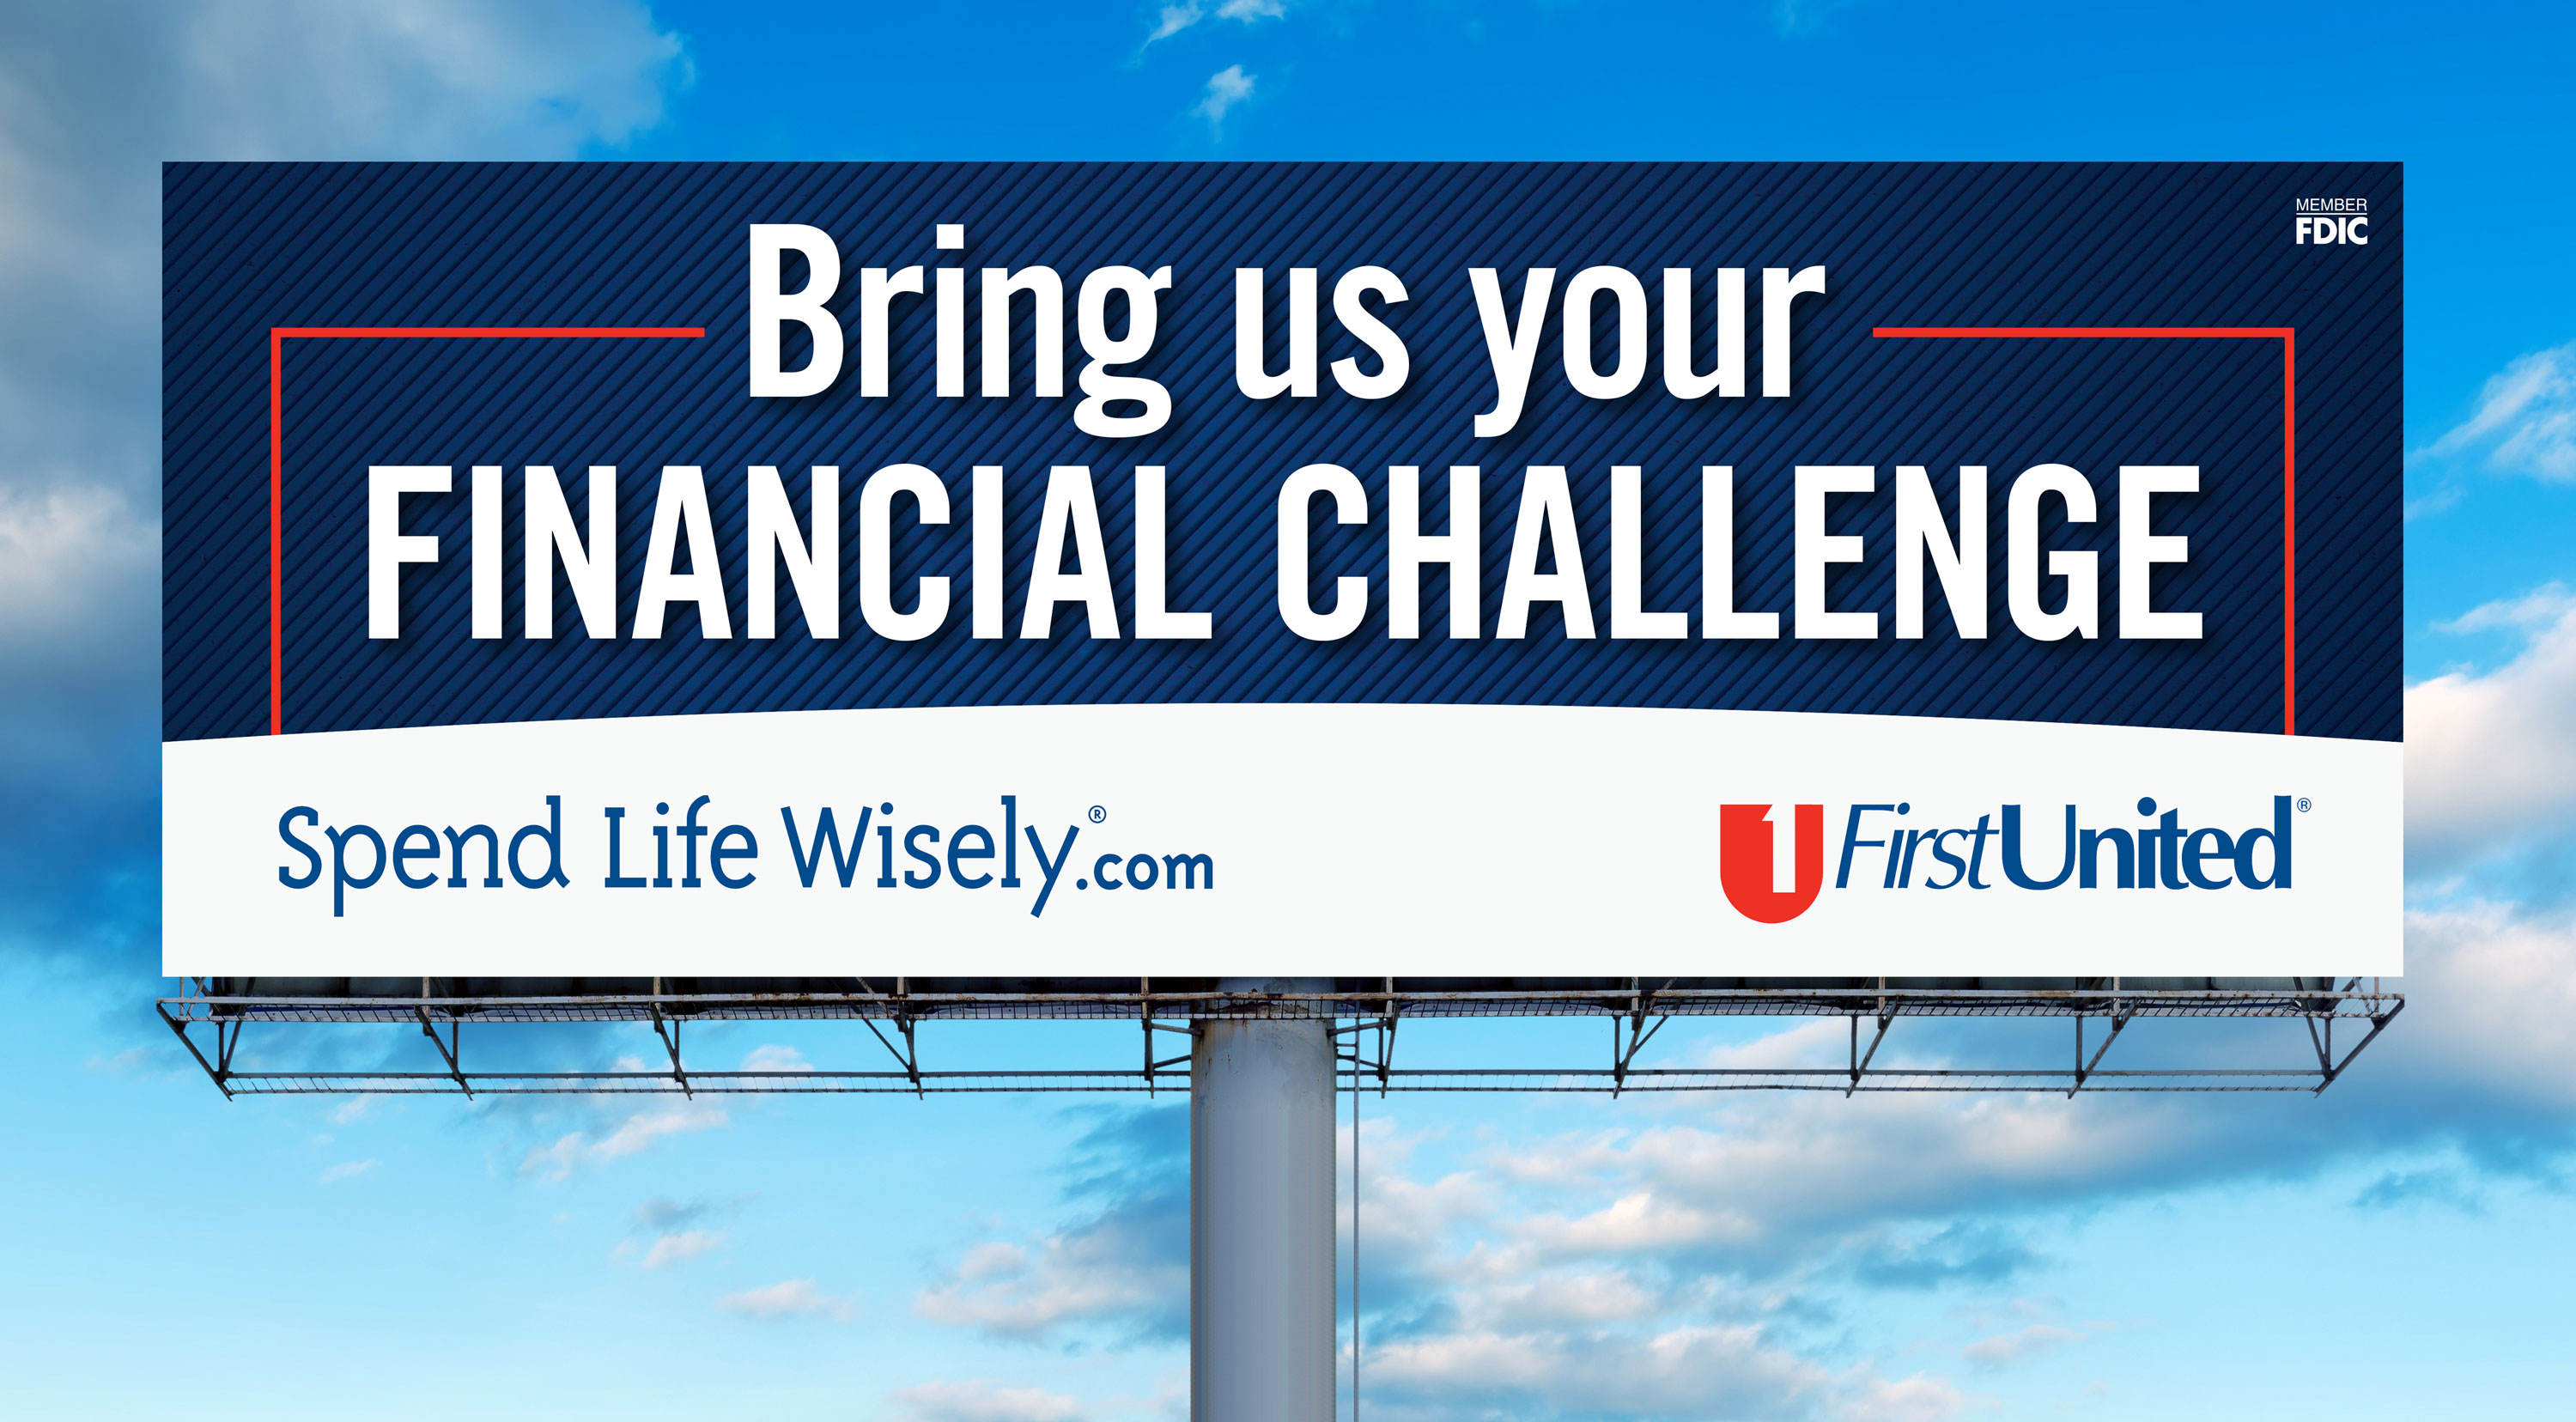 First United Bank Bring Us Your Financial Challenge Outdoor